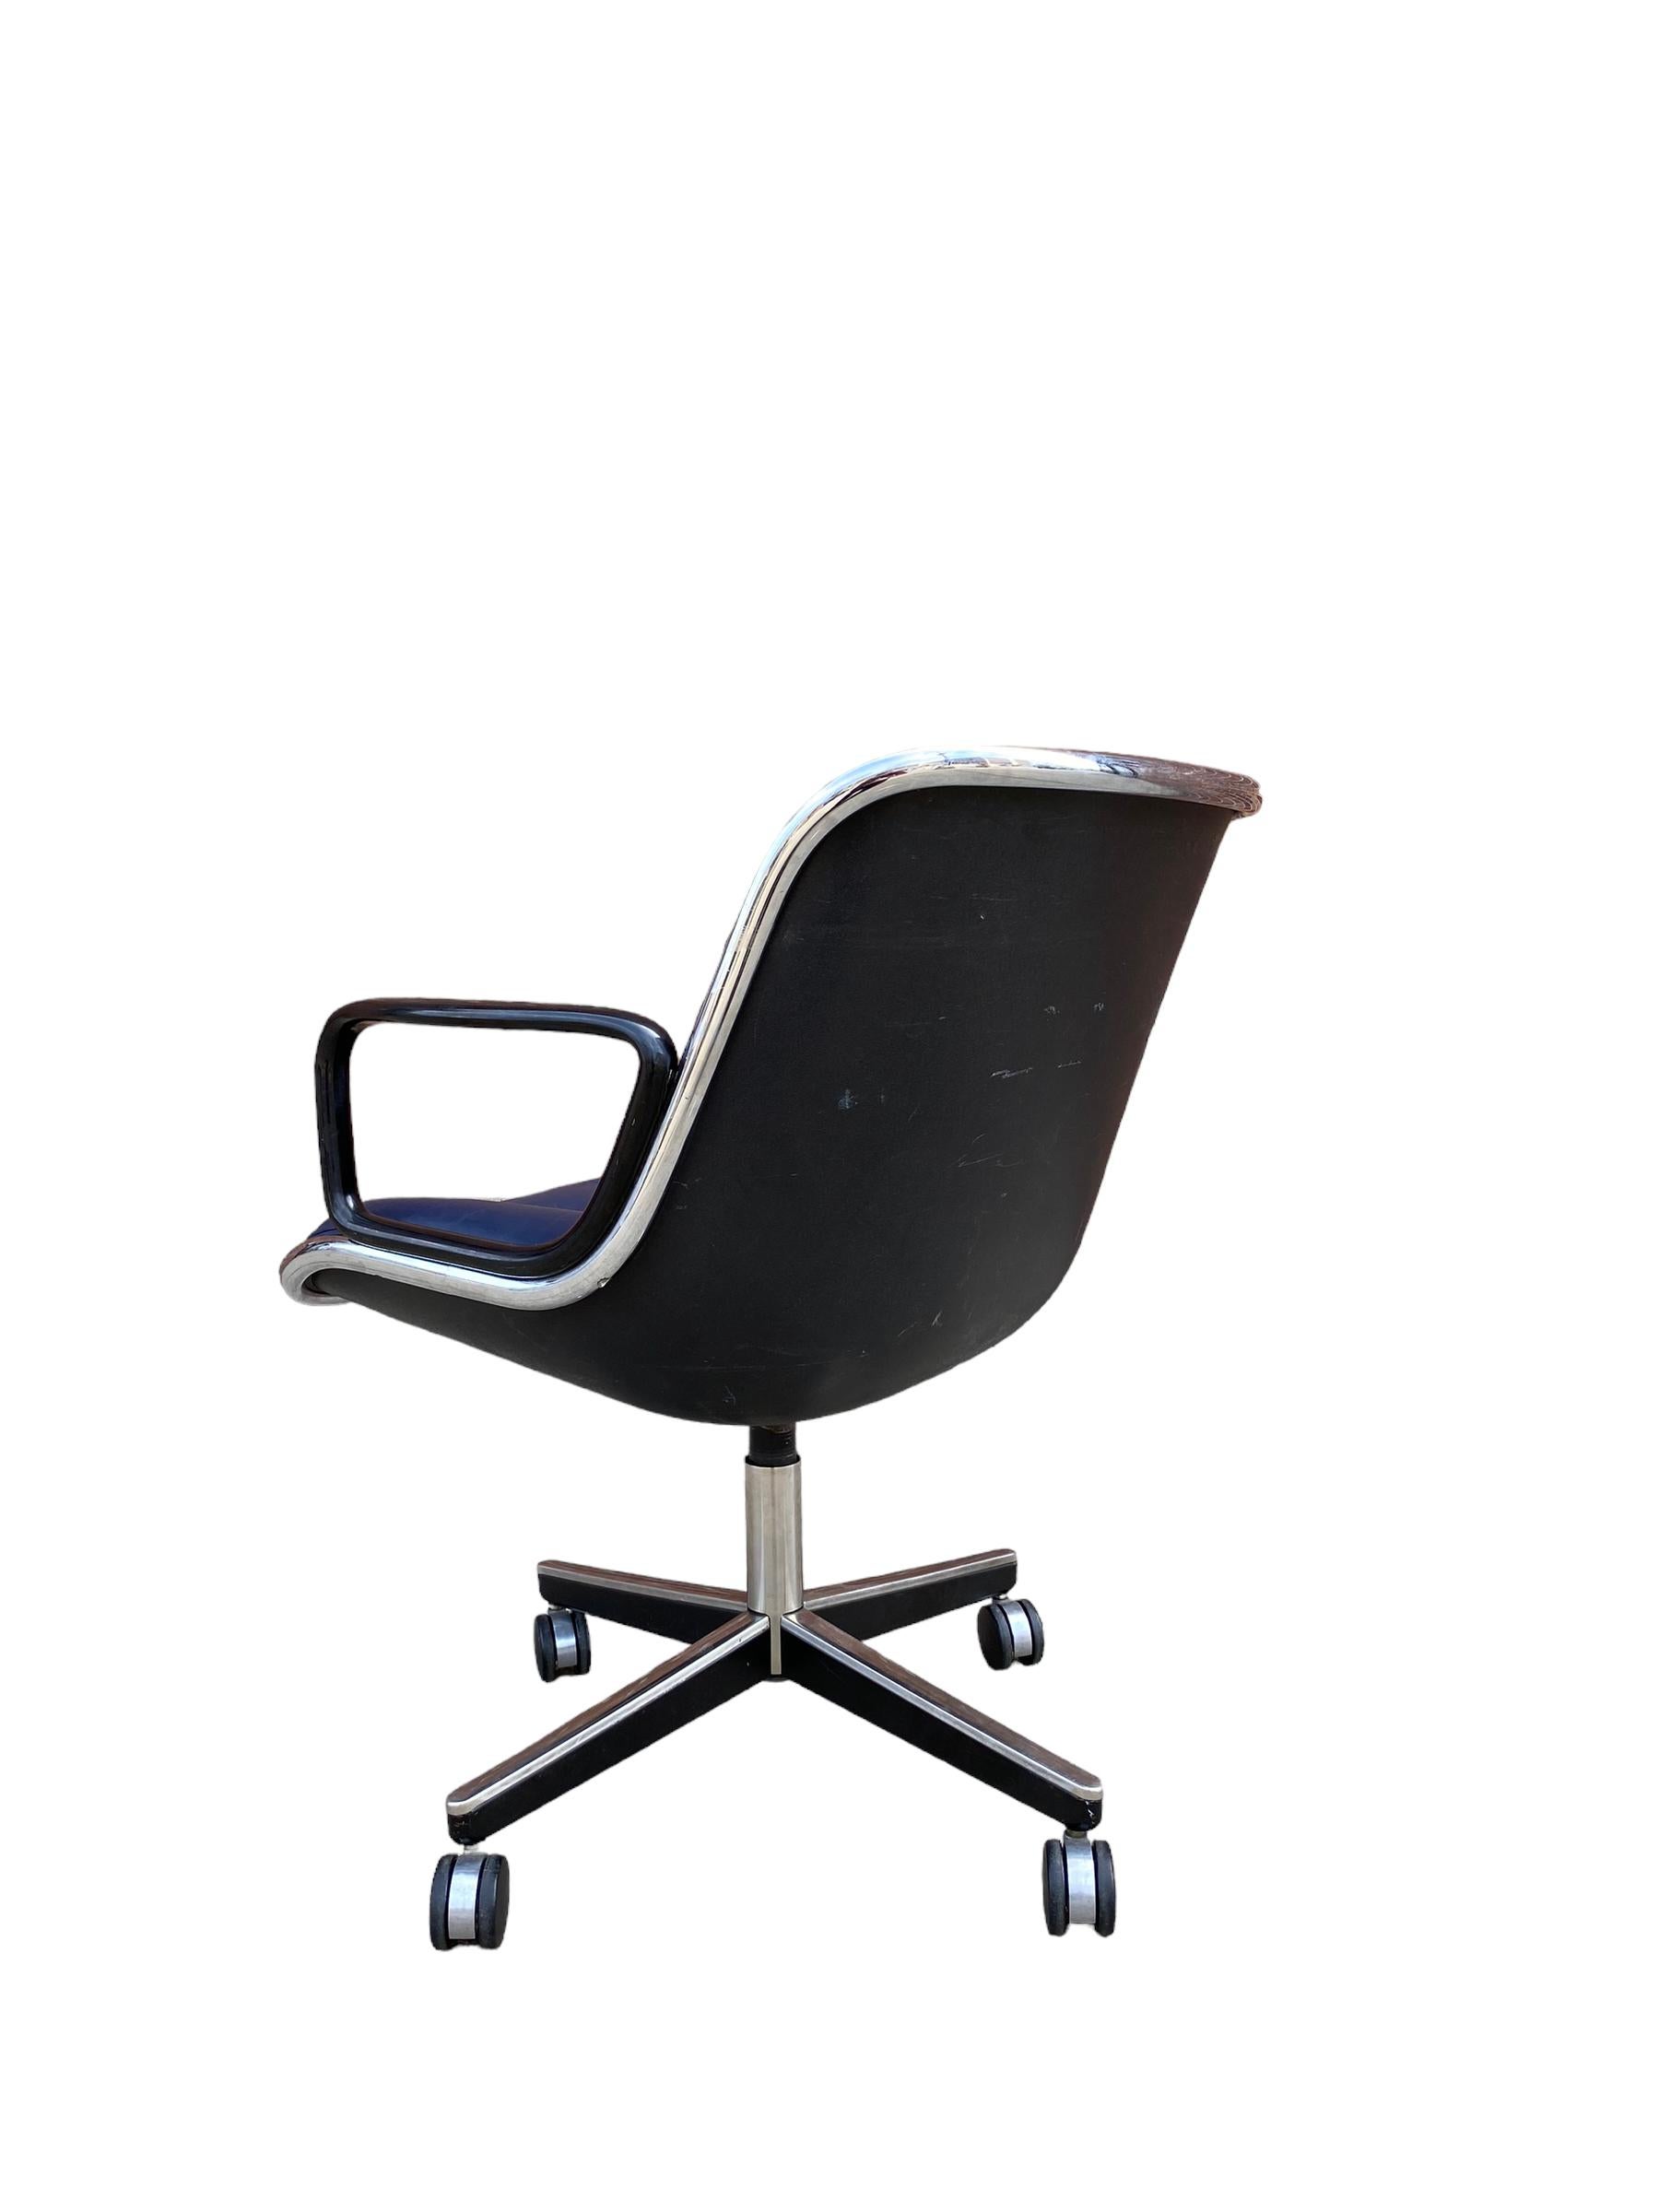 American Charles Pollock Desk Chair by Knoll in Navy Blue Leather For Sale